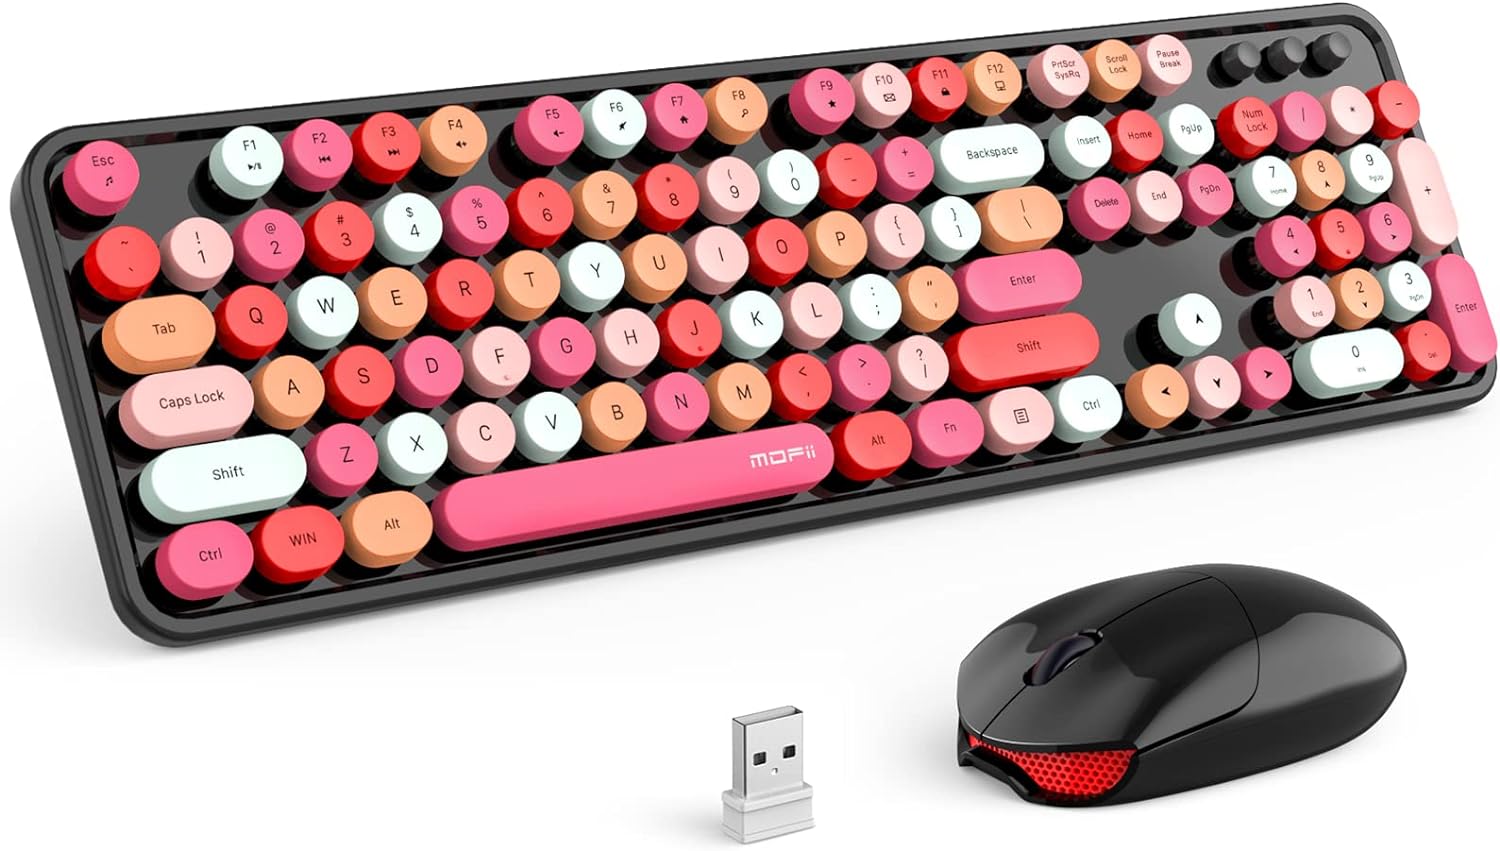 MOFII Wireless Keyboard and Mouse - Black Pink - Tapelf